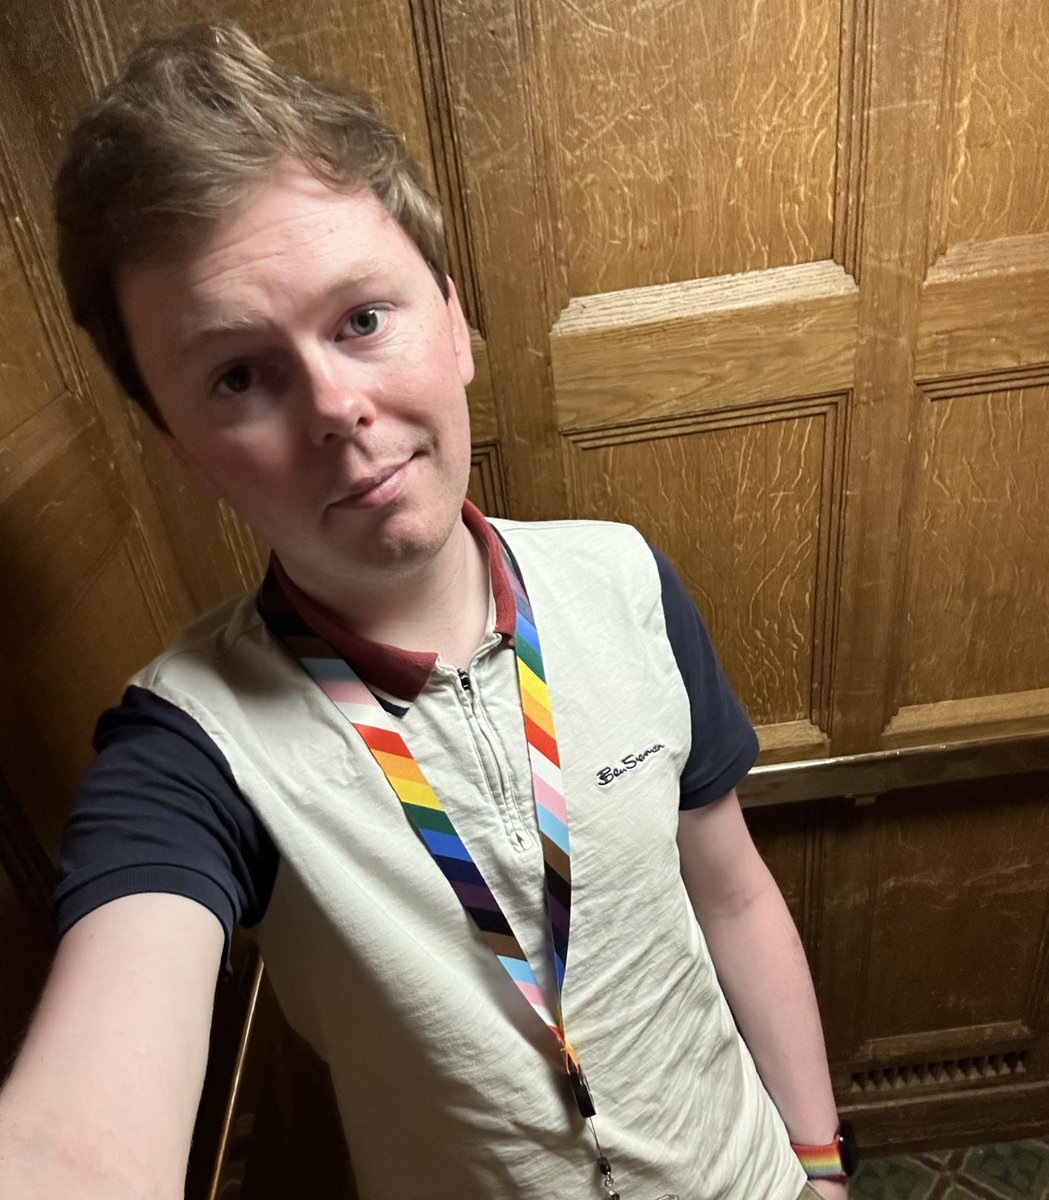 Never knew me wearing this lanyard was ‘political activism’, I just call it being proud of who I am. But this just makes me even more determined to wear it now and show that everyone in the LGBTQIA+ family is welcome and respected here in Parliament! 🩷❤️🧡💛💚🩵💙💜🖤🩶🤍🤎